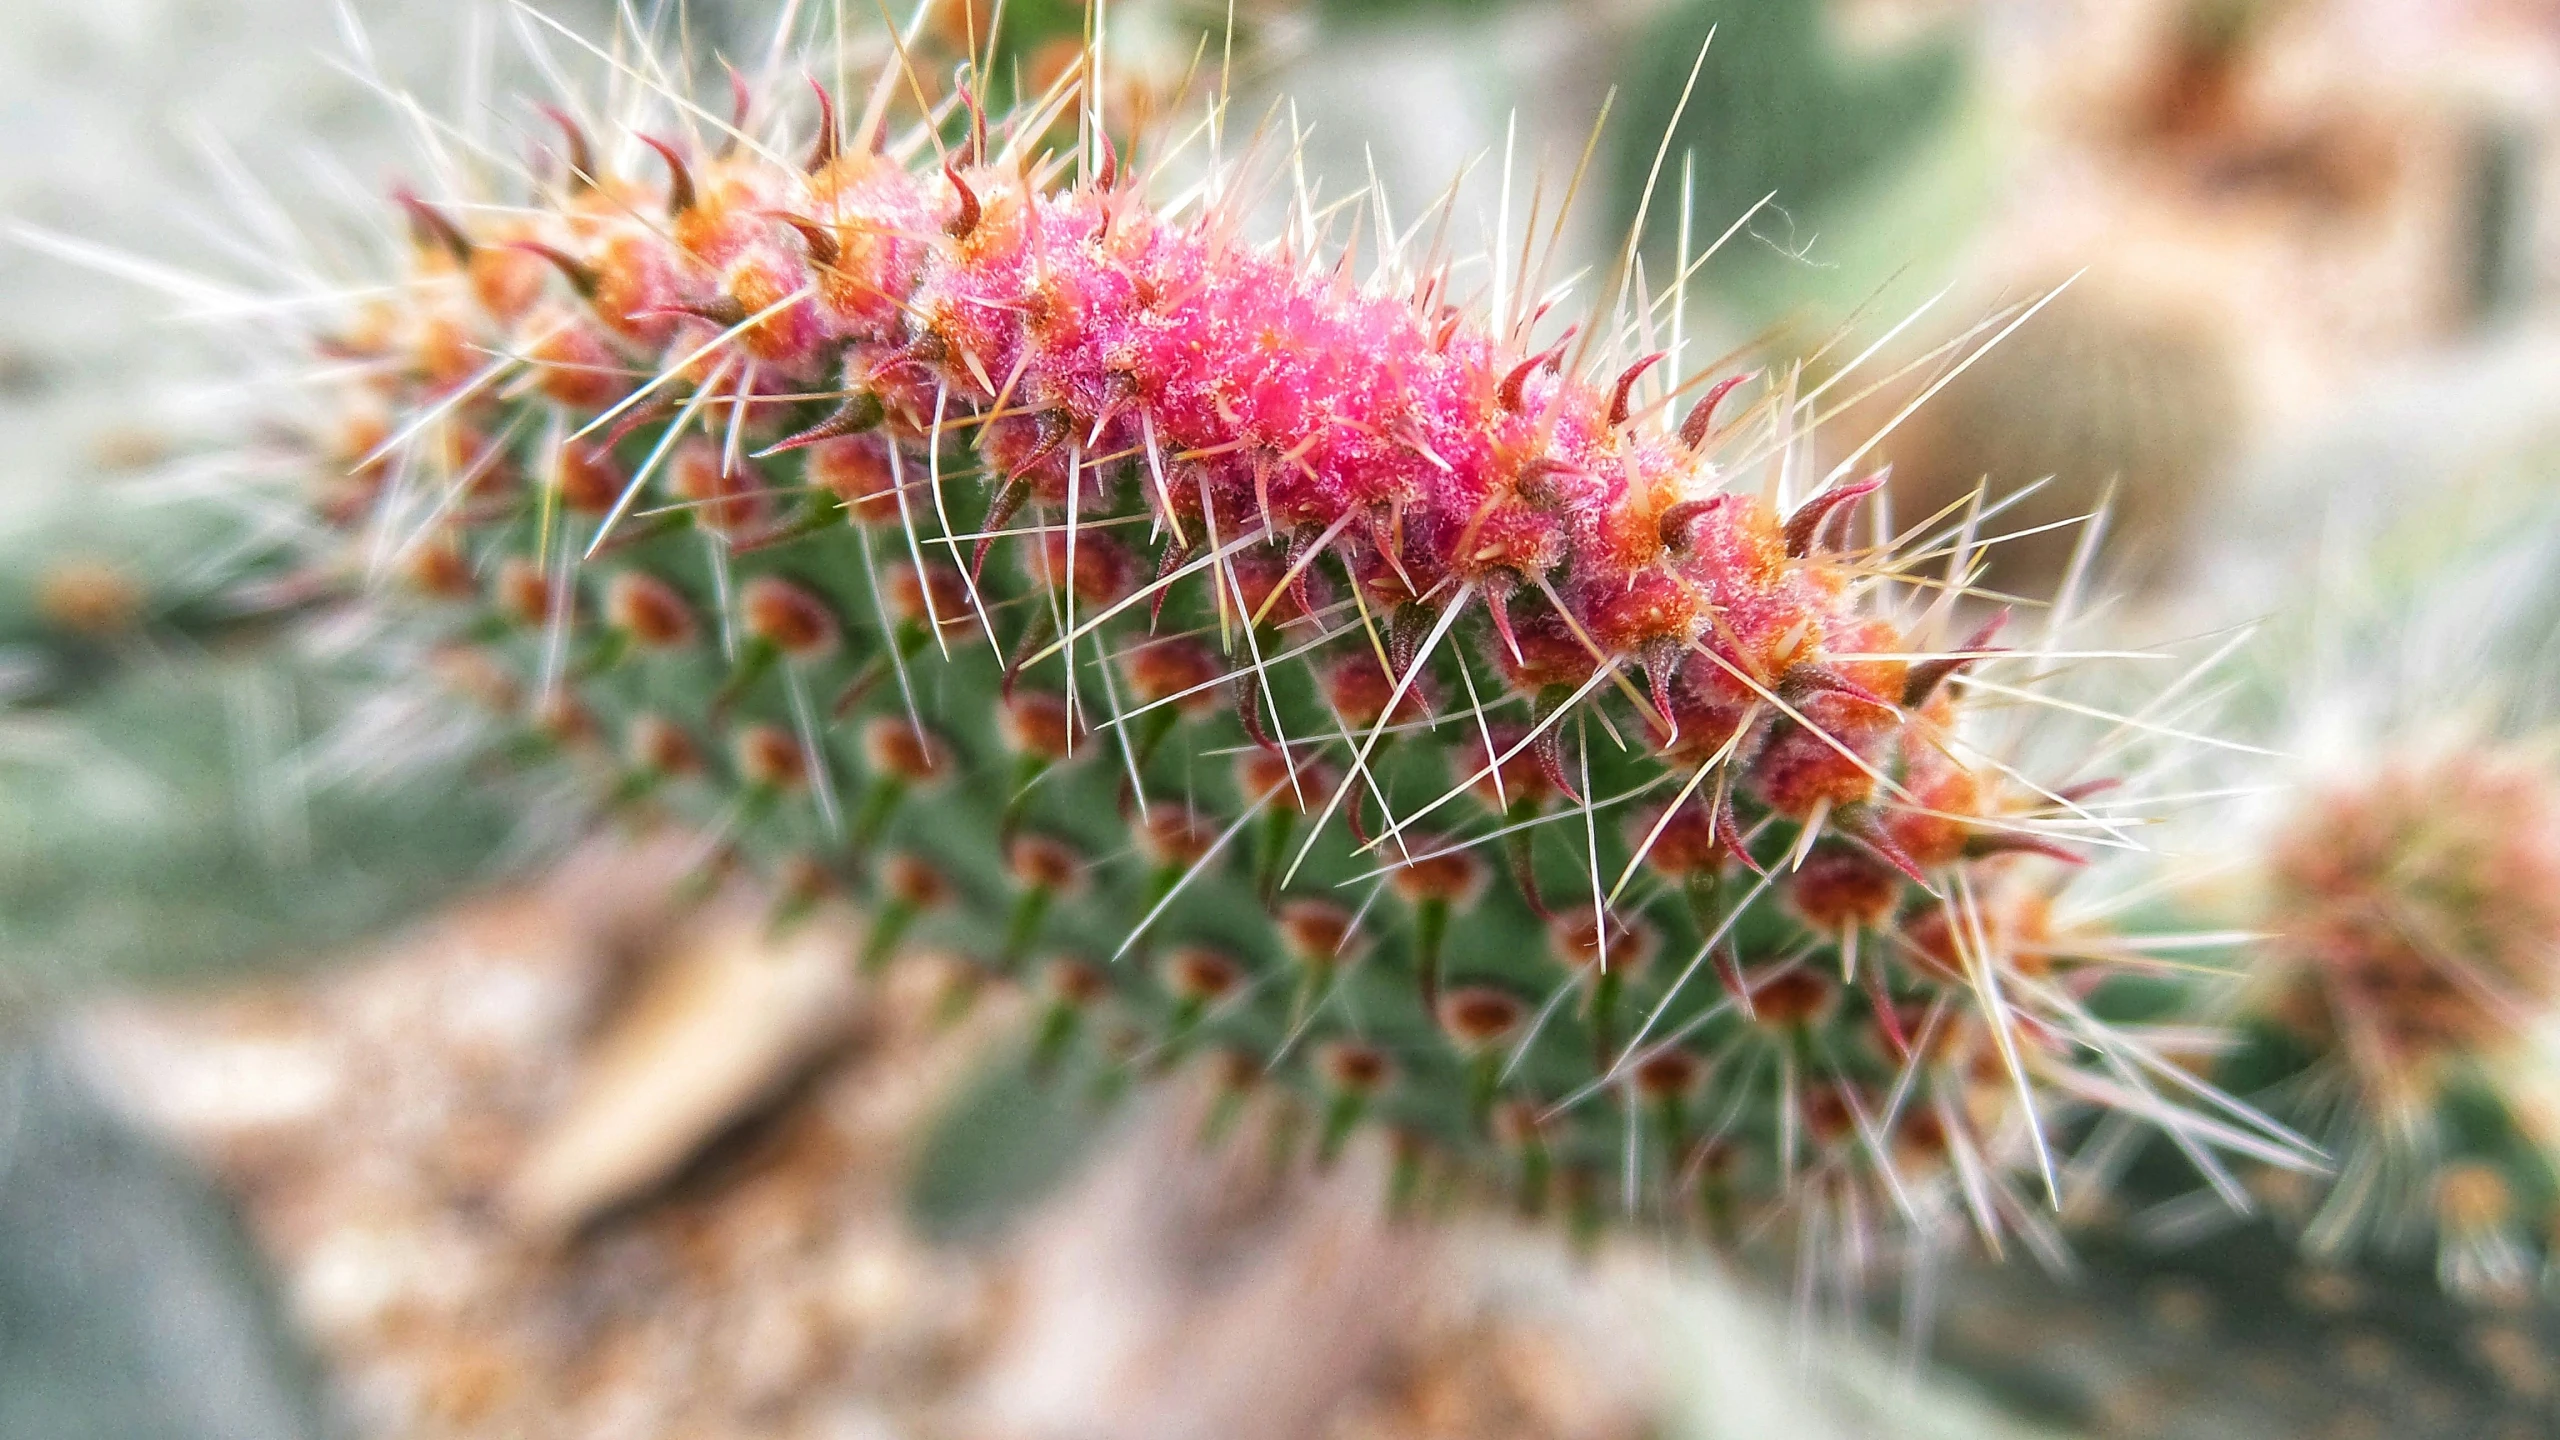 the flower head of a cactus showing its thin spines